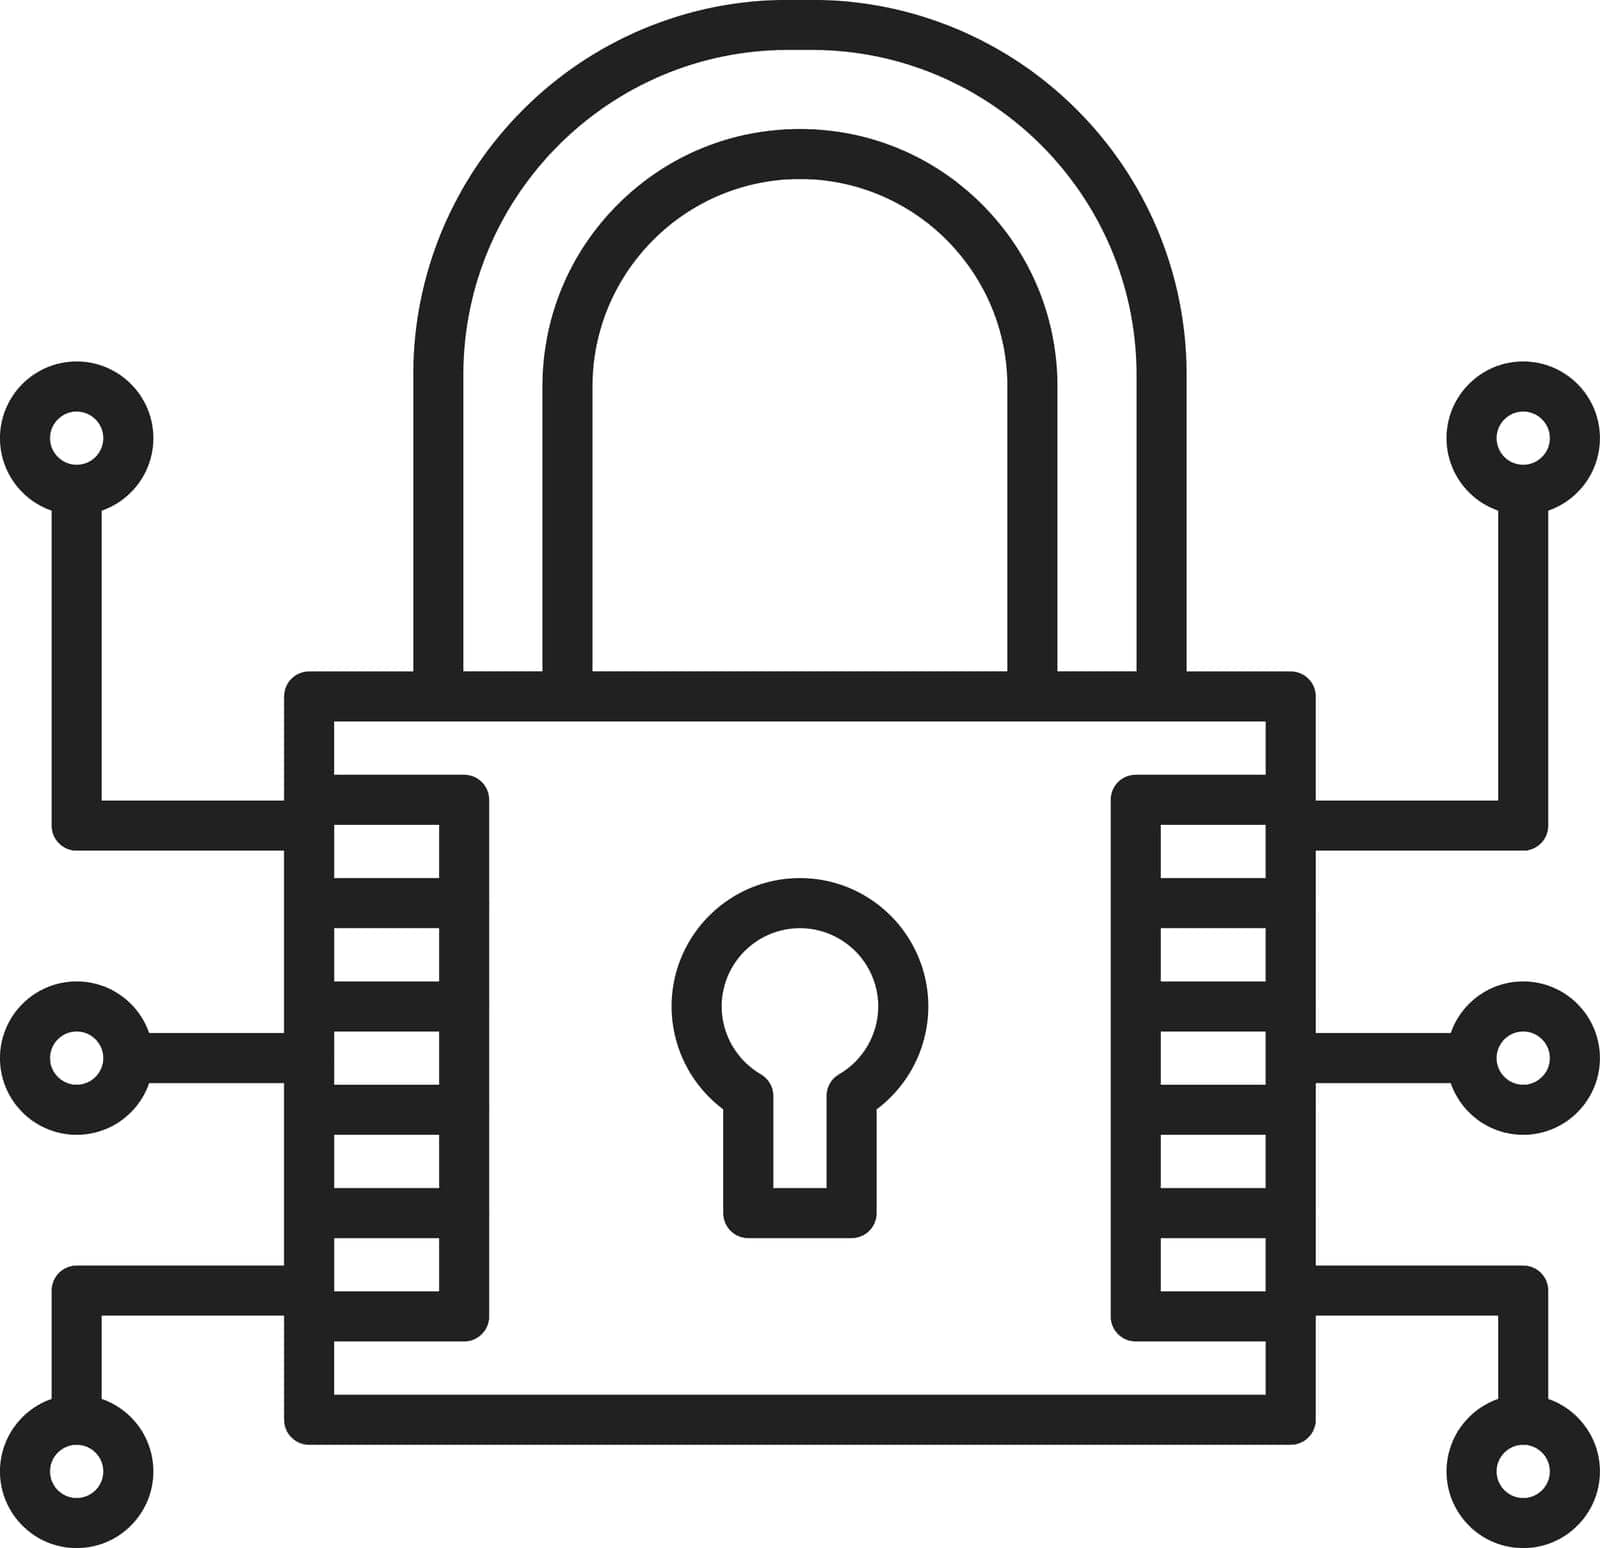 Data Encryption Icon image. Suitable for mobile application.